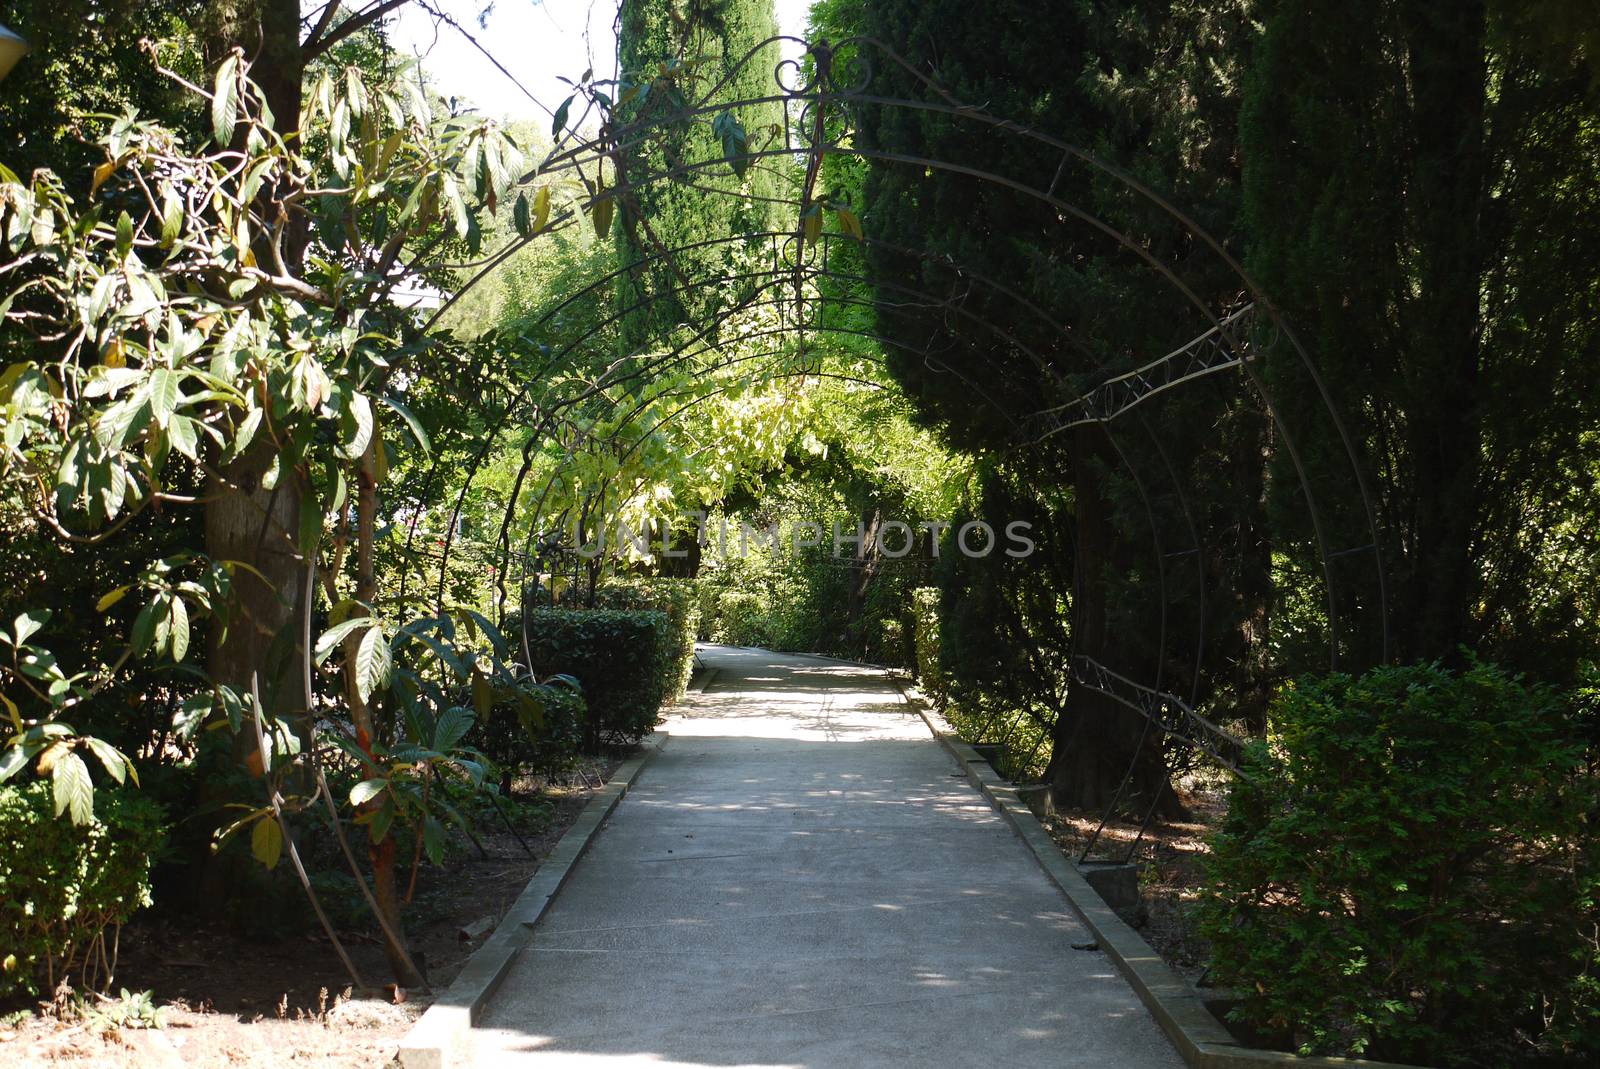 The alley in the park is among the green scenic nature with a wire arch made by hand. A beautiful place for walking with a day off. by Adamchuk